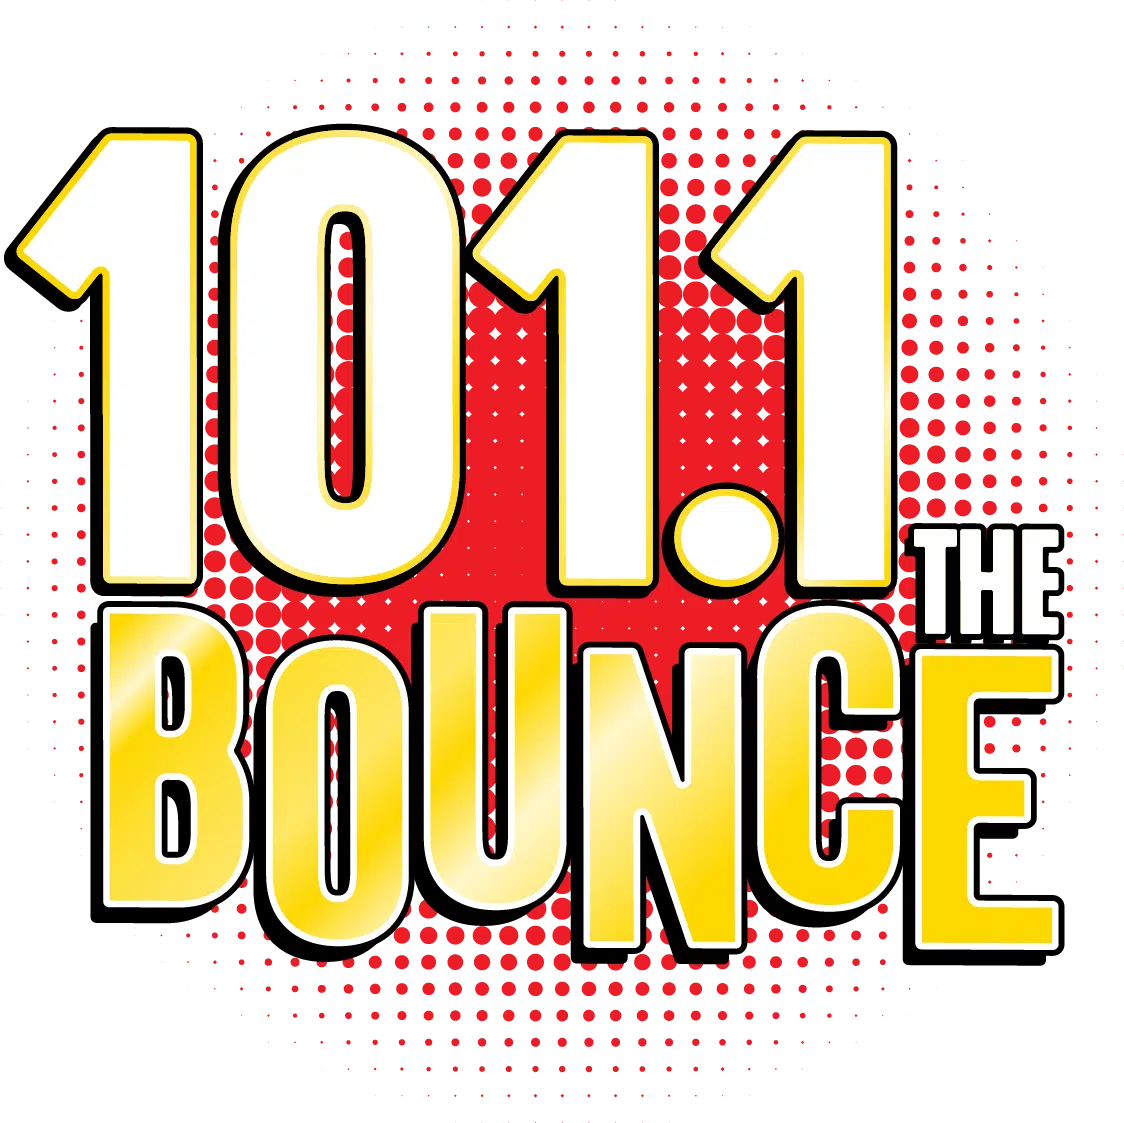 101.1 The Bounce